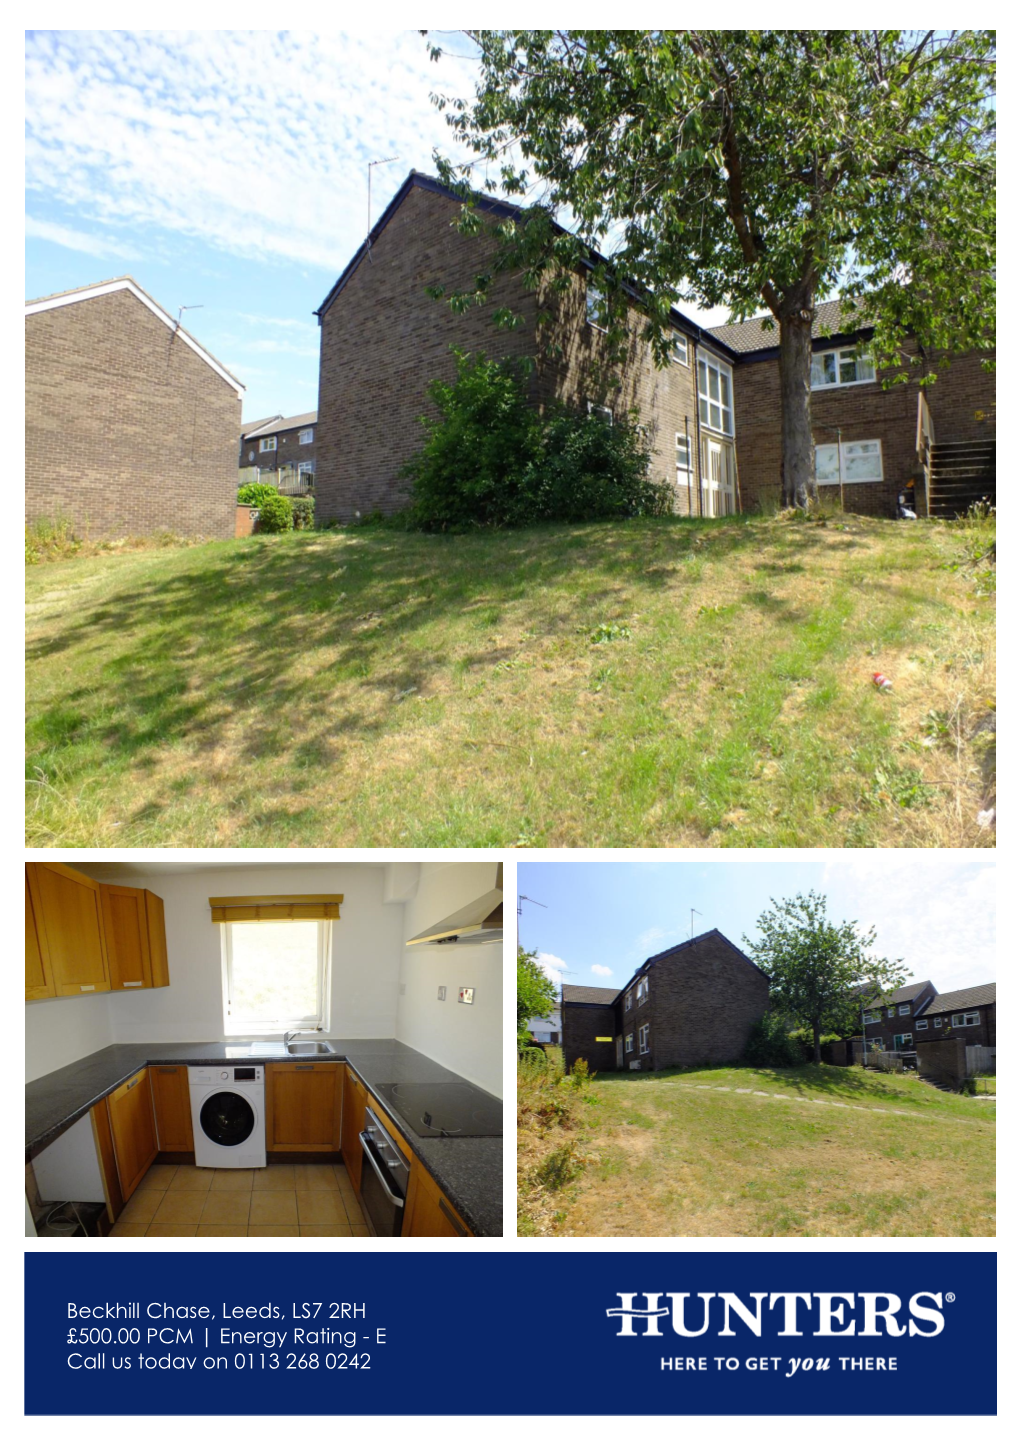 Beckhill Chase, Leeds, LS7 2RH £500.00 PCM | Energy Rating - E Call Us Today on 0113 268 0242